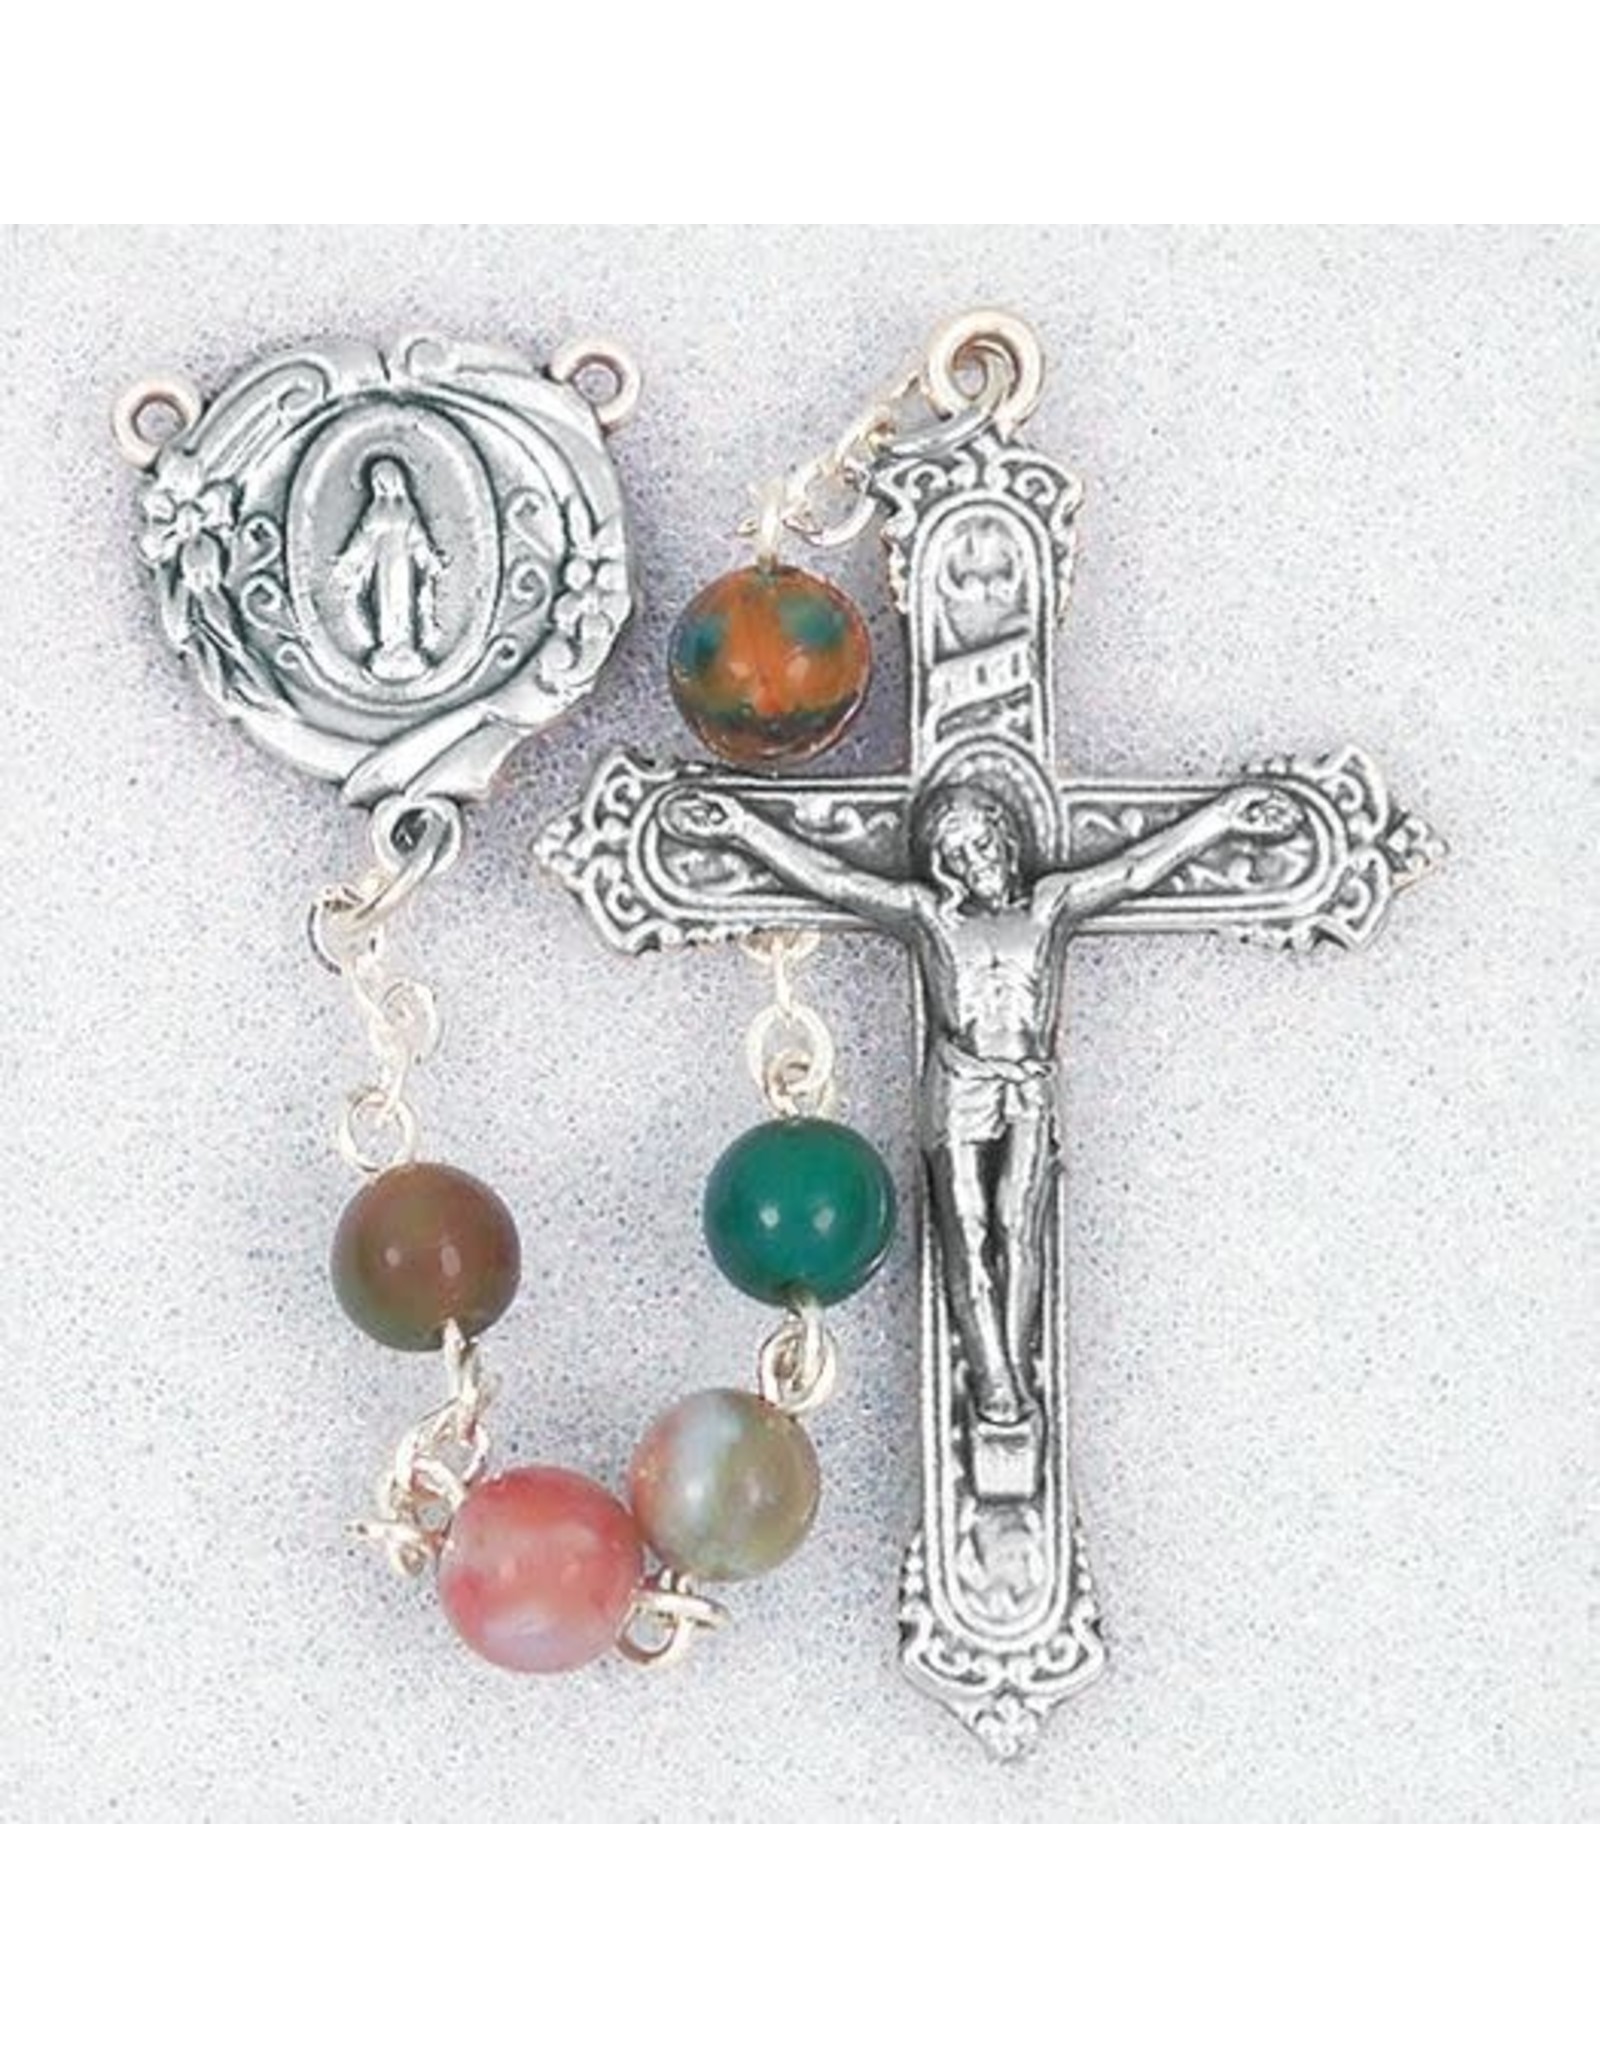 Hirten 6 mm India Agate Bead Rosary in Deluxe Box